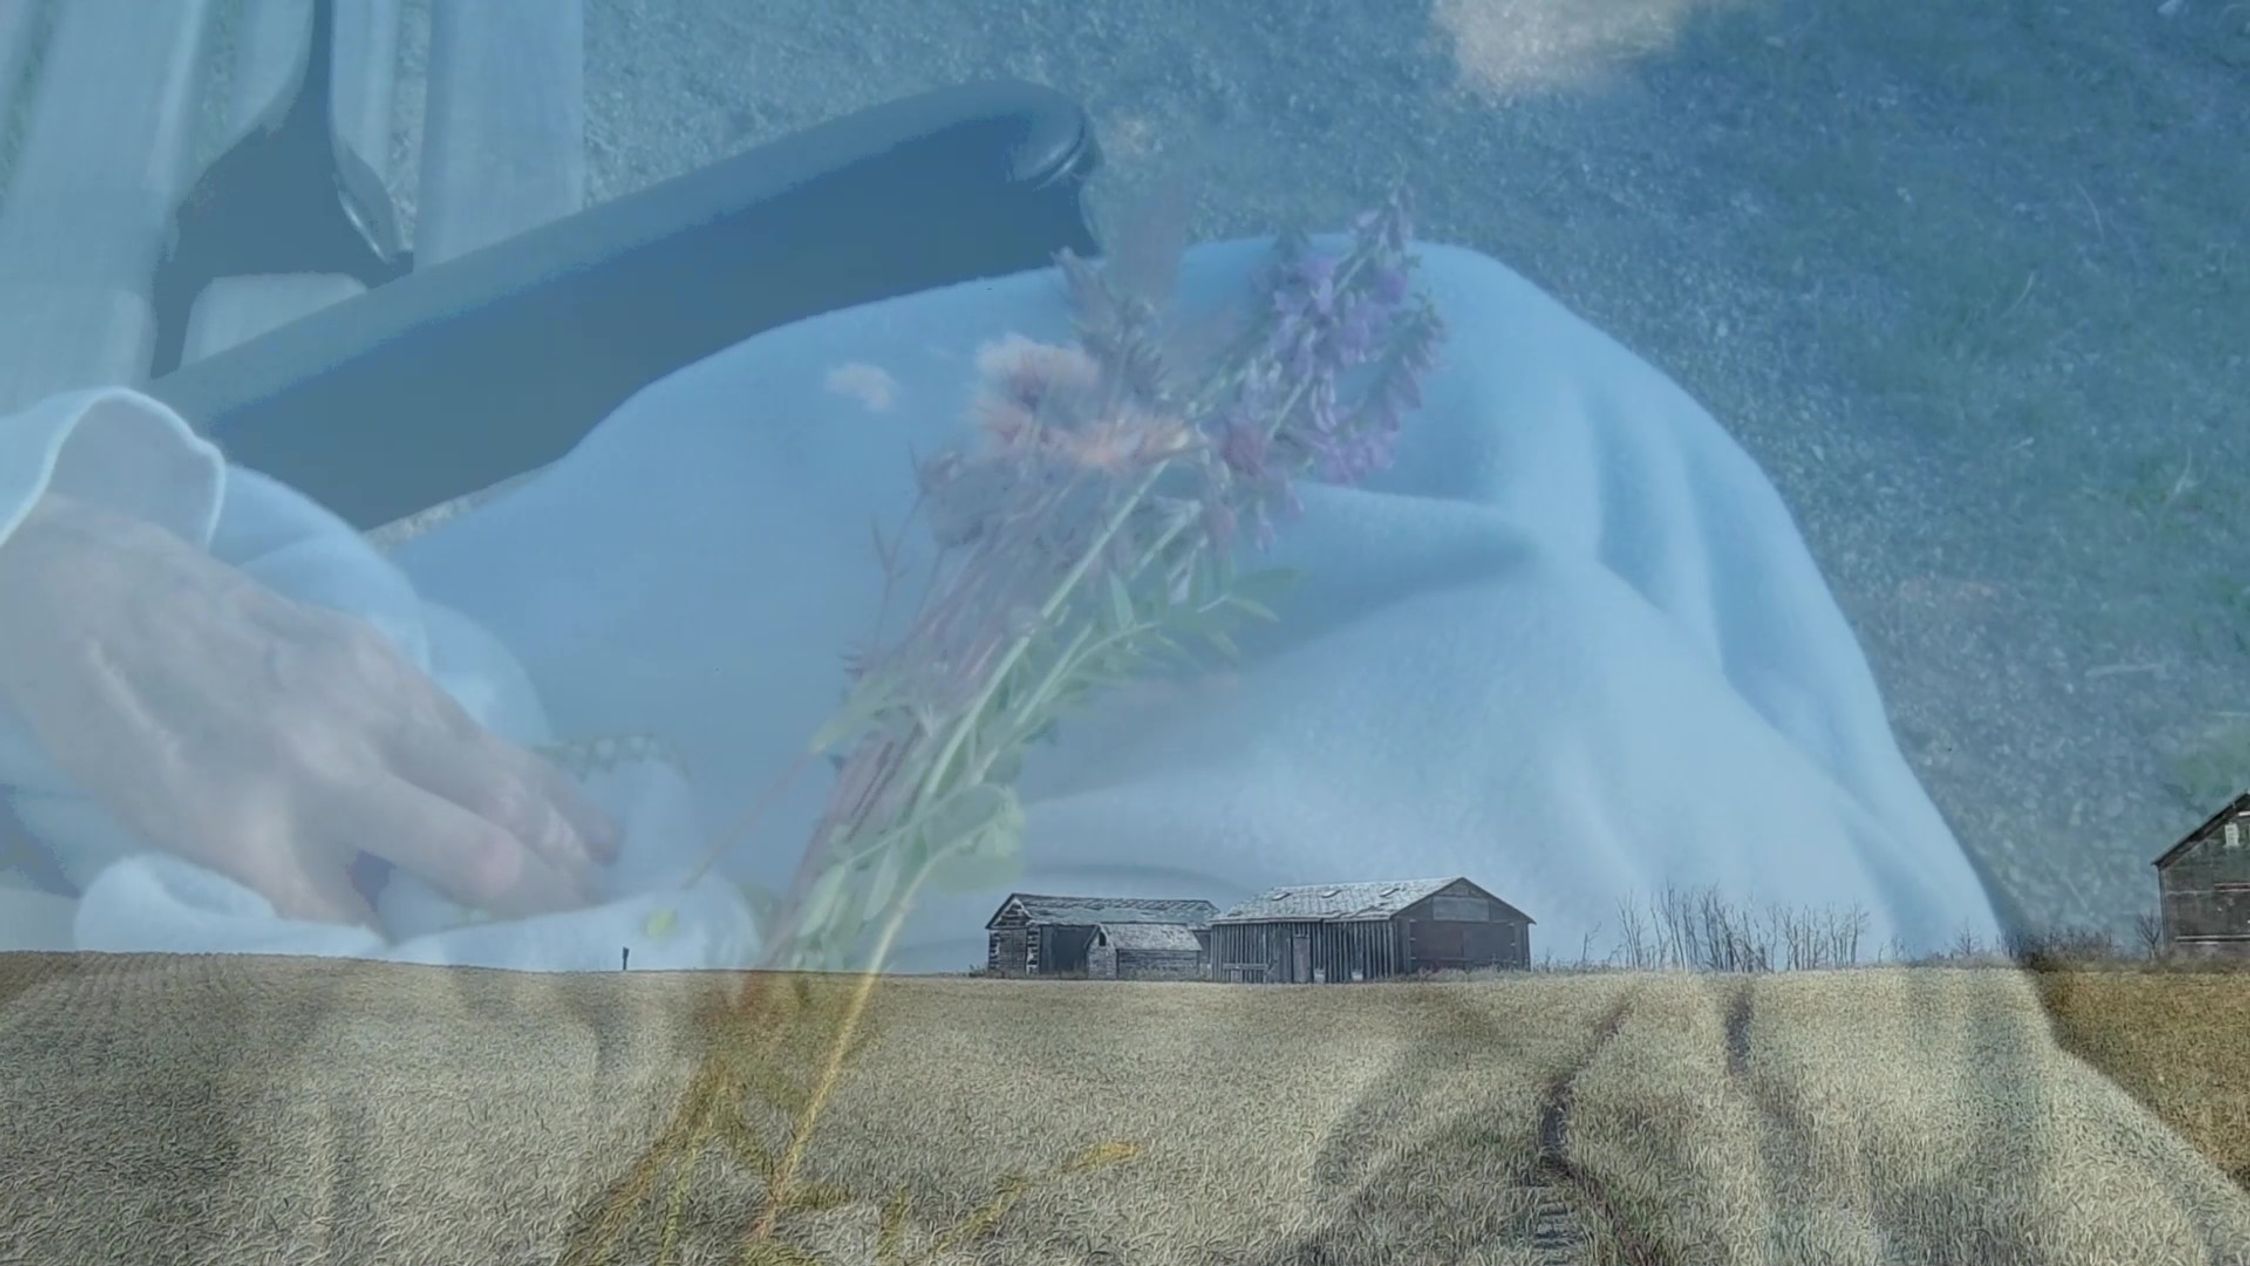 A composite image with a double exposure effect. In the foreground, a translucent image of a human hand holding a bunch of wildflowers with purple blooms is superimposed. Behind this, a rural landscape unfolds, featuring a field of golden-hued grass leading to rustic wooden buildings that appear to be barns or farmhouses. The background scene is in sharp focus, with clear blue skies above and the structures casting shadows on the grass, indicating sunlight coming from the left. The overall effect is ethereal and artistic, with the hand and flowers adding a touch of delicate human presence to the rugged countryside setting.